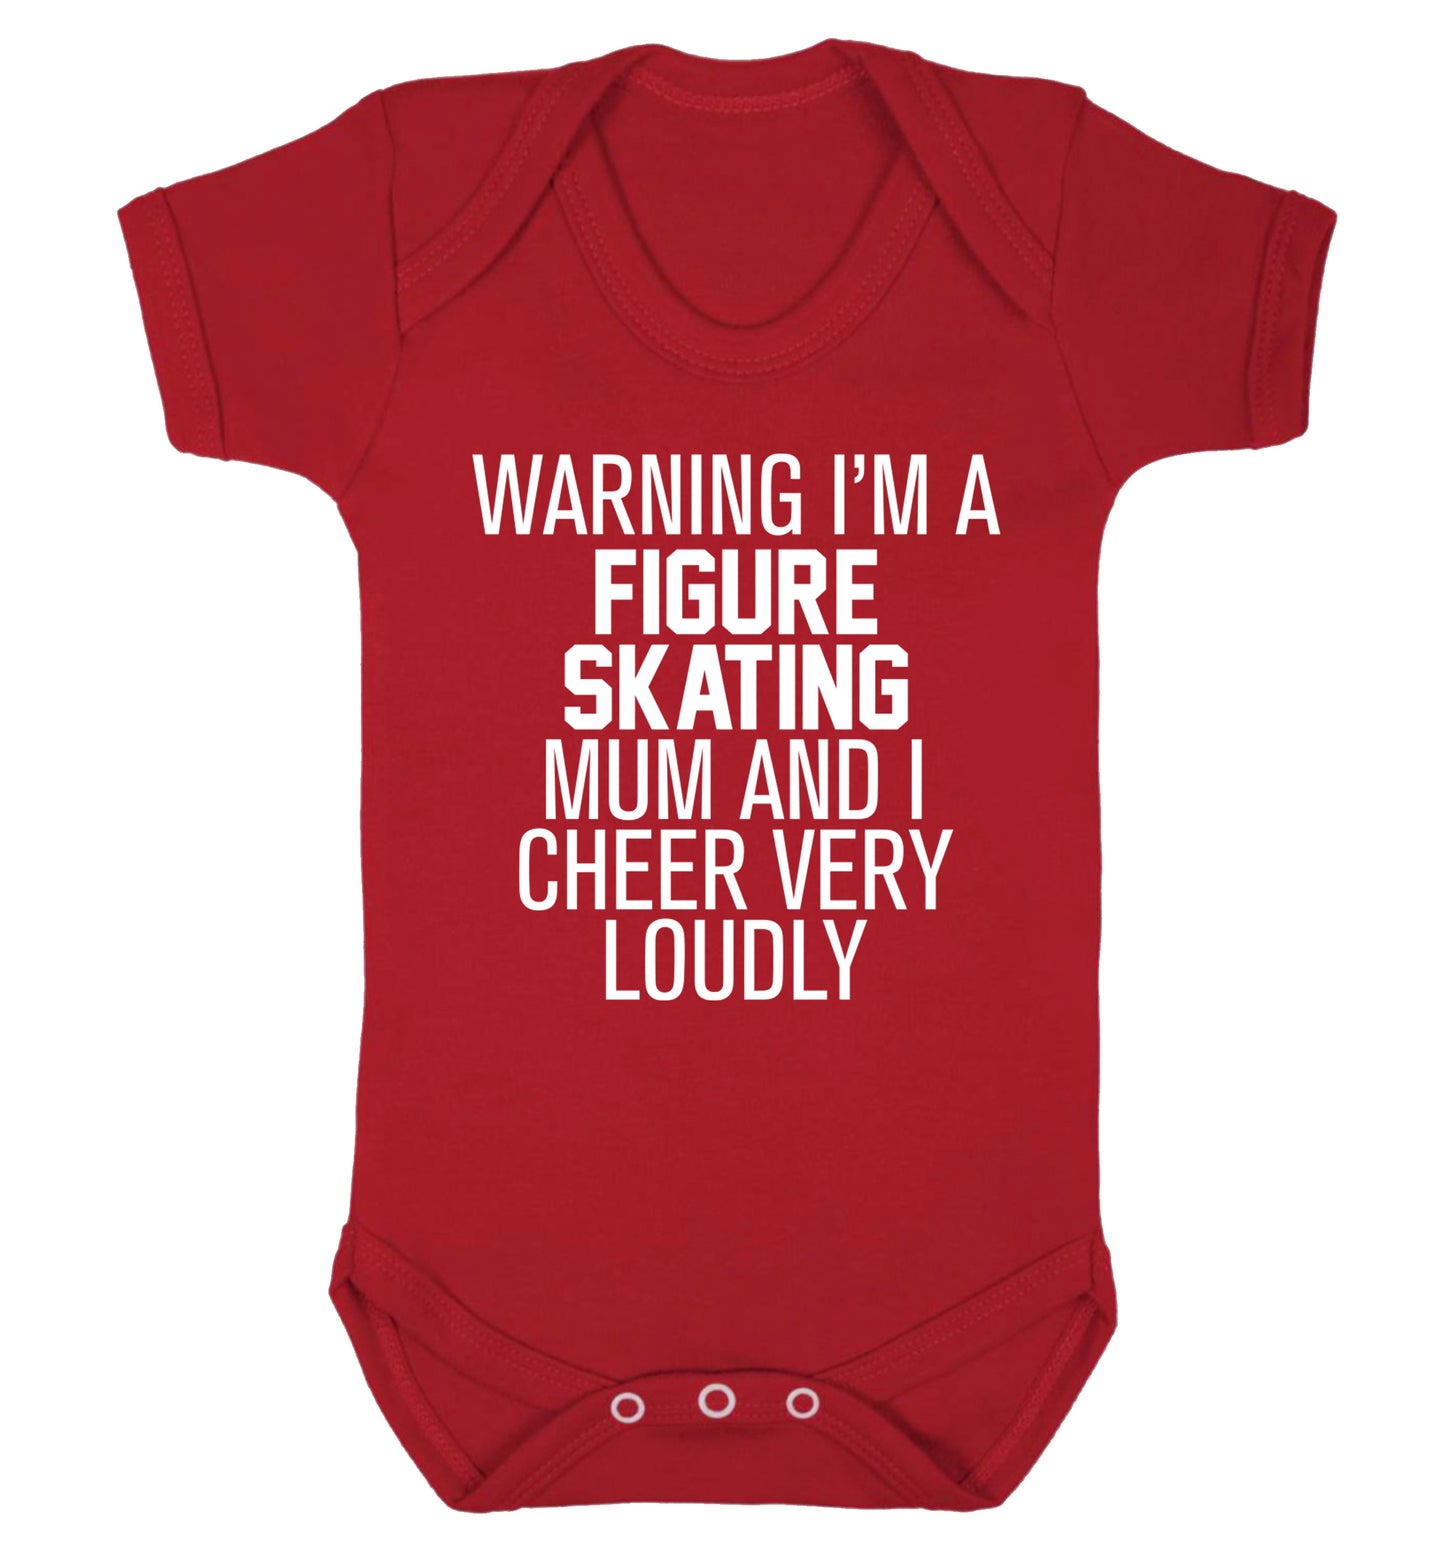 Warning I'm a figure skating mum and I cheer very loudly Baby Vest red 18-24 months